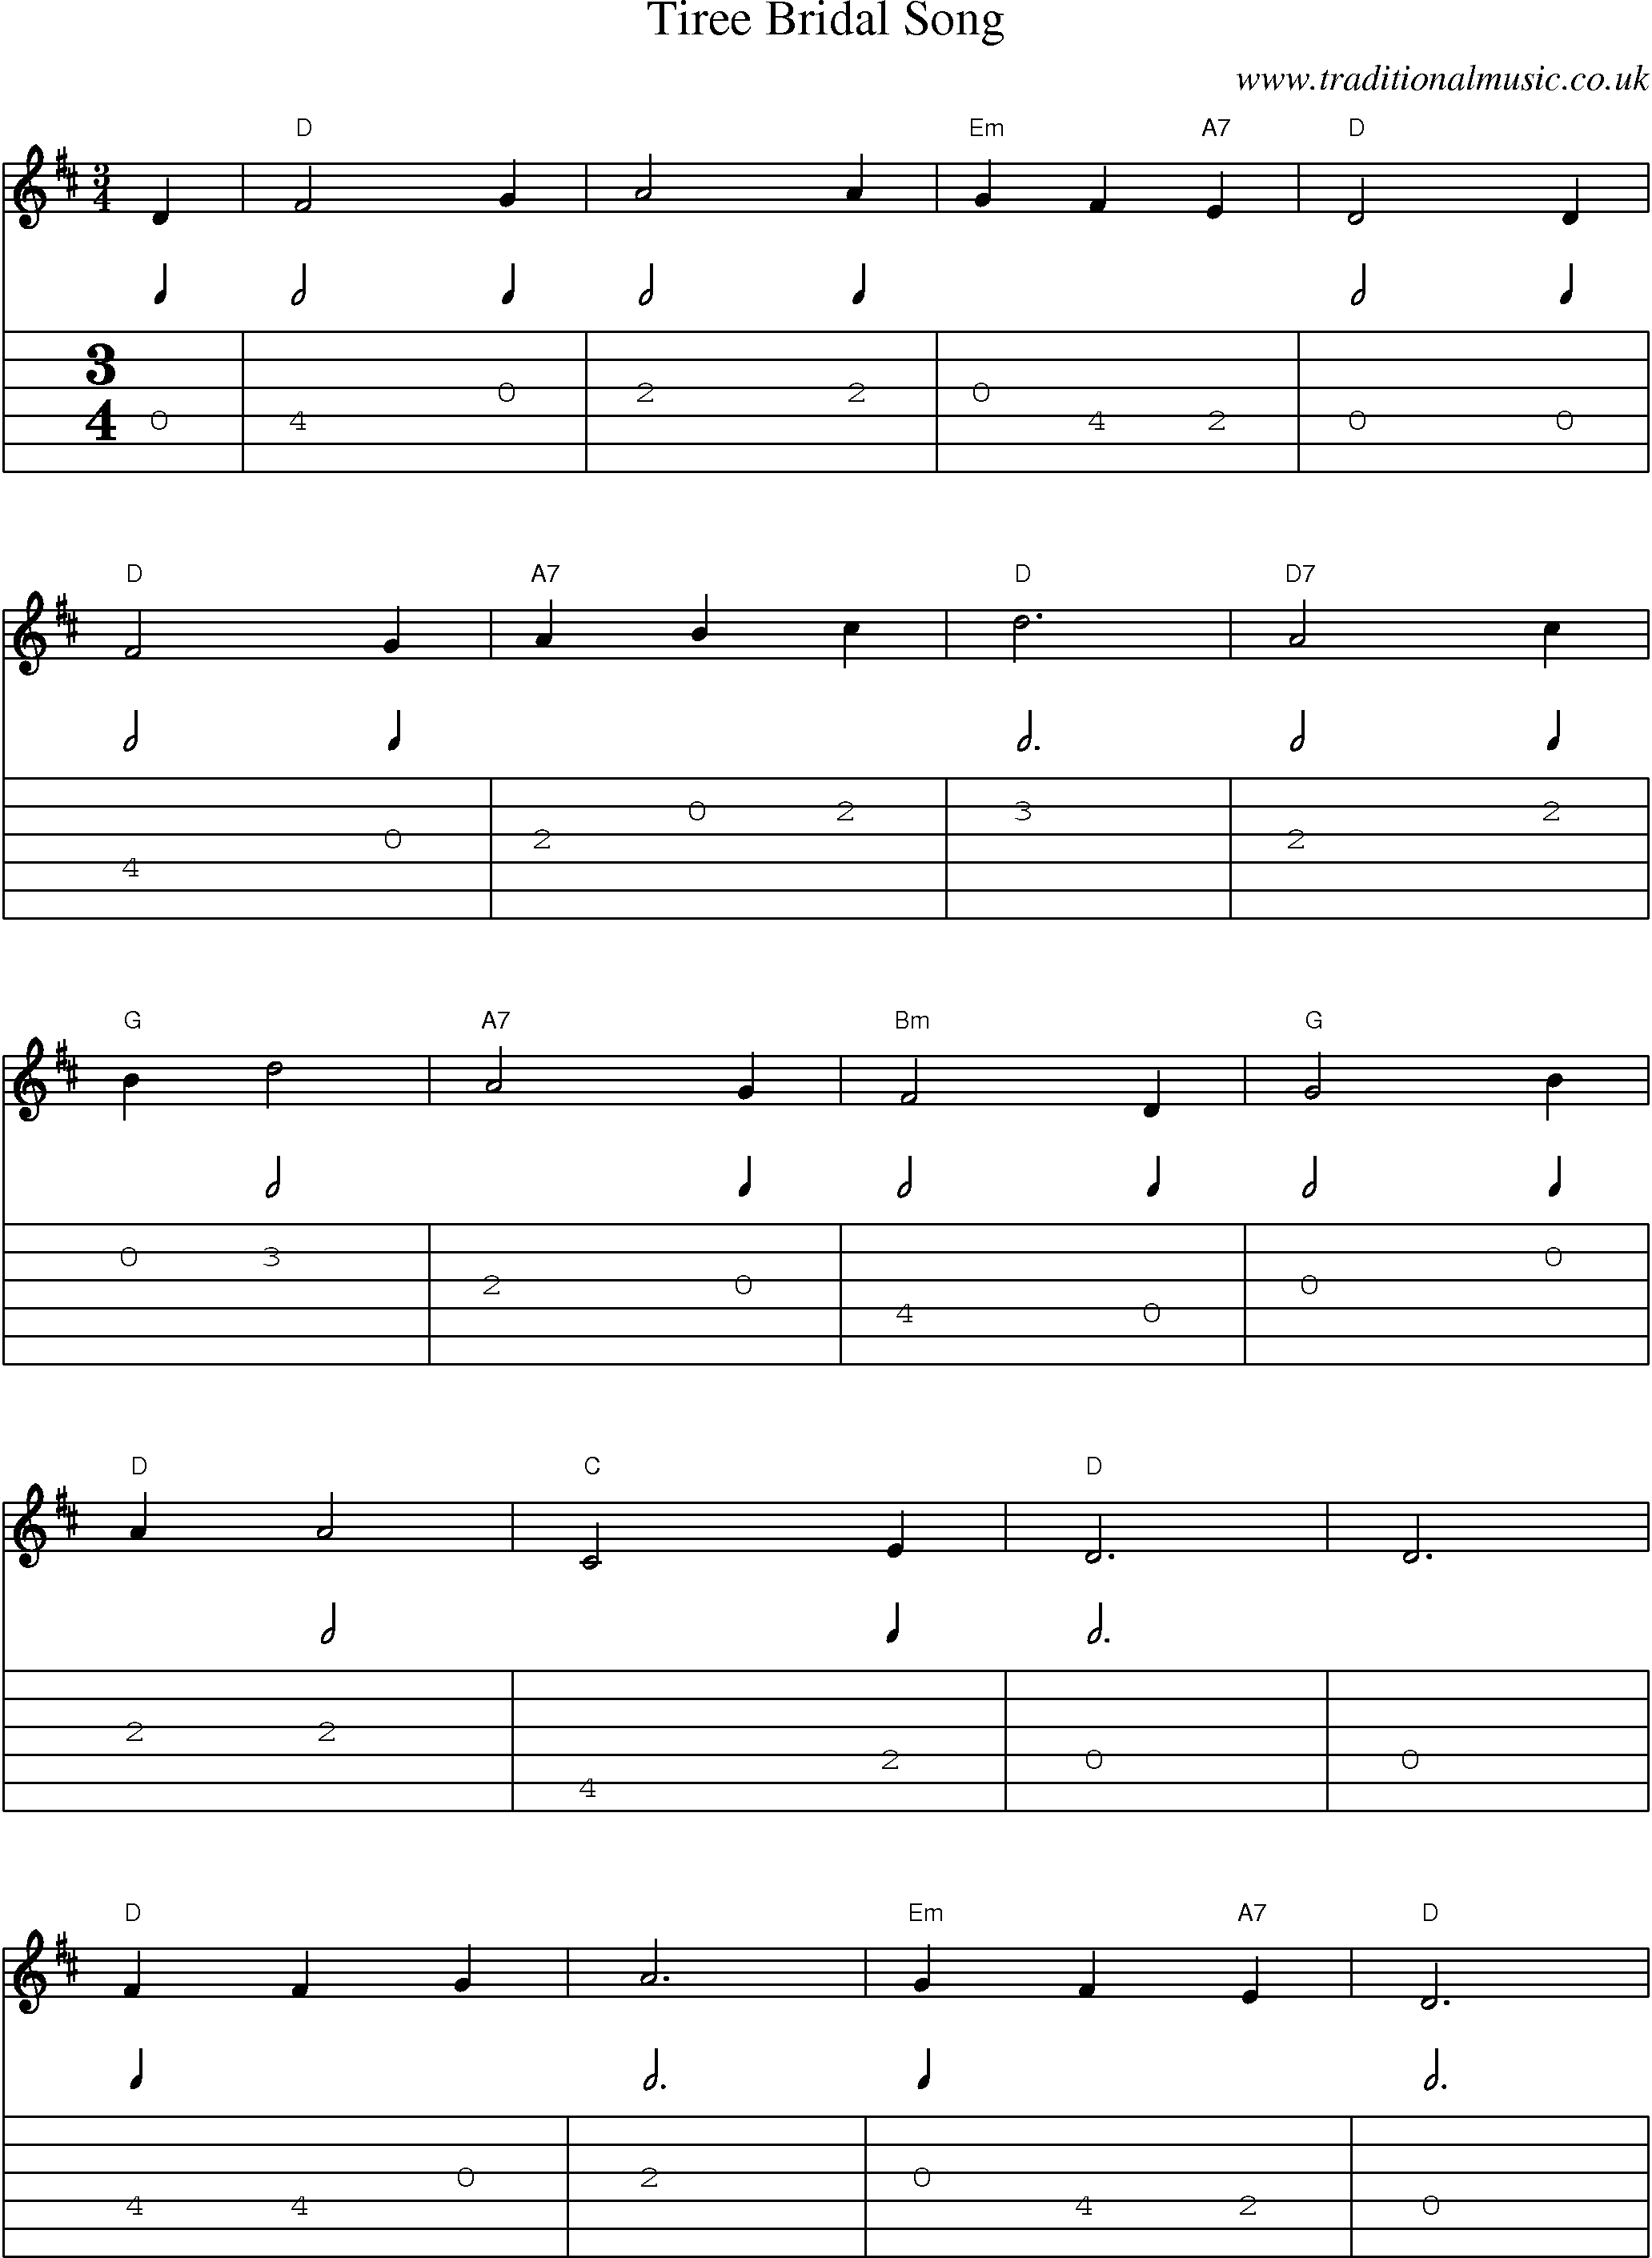 Music Score and Guitar Tabs for Tiree Bridal Song